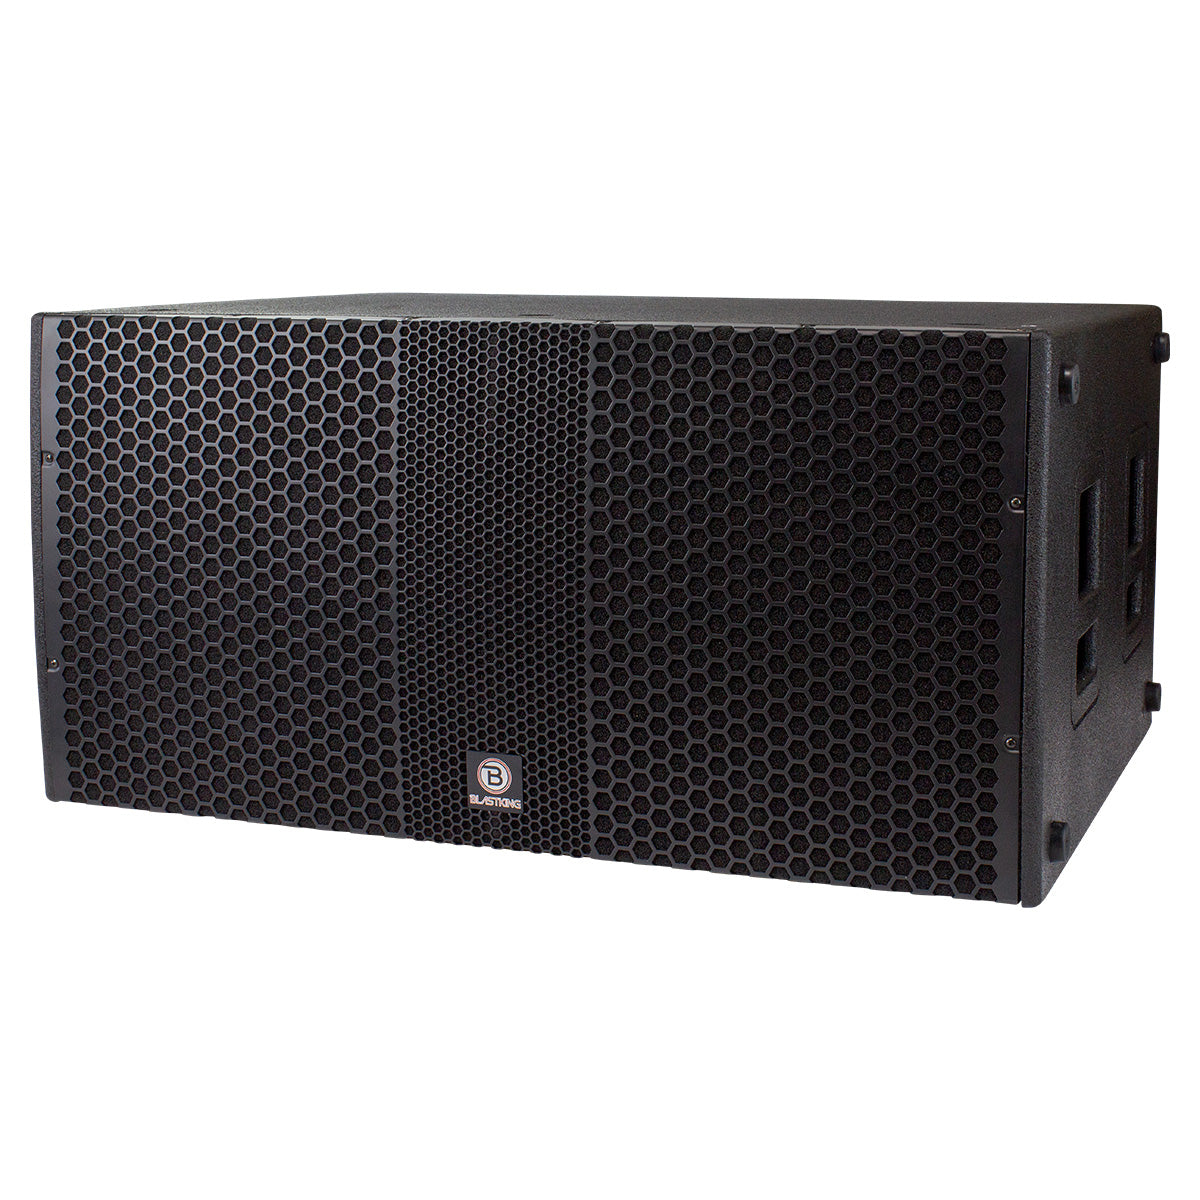 Blastking NOVO-218A Double 18” Active Subwoofer 3000 Watts Class-D with DSP Processor